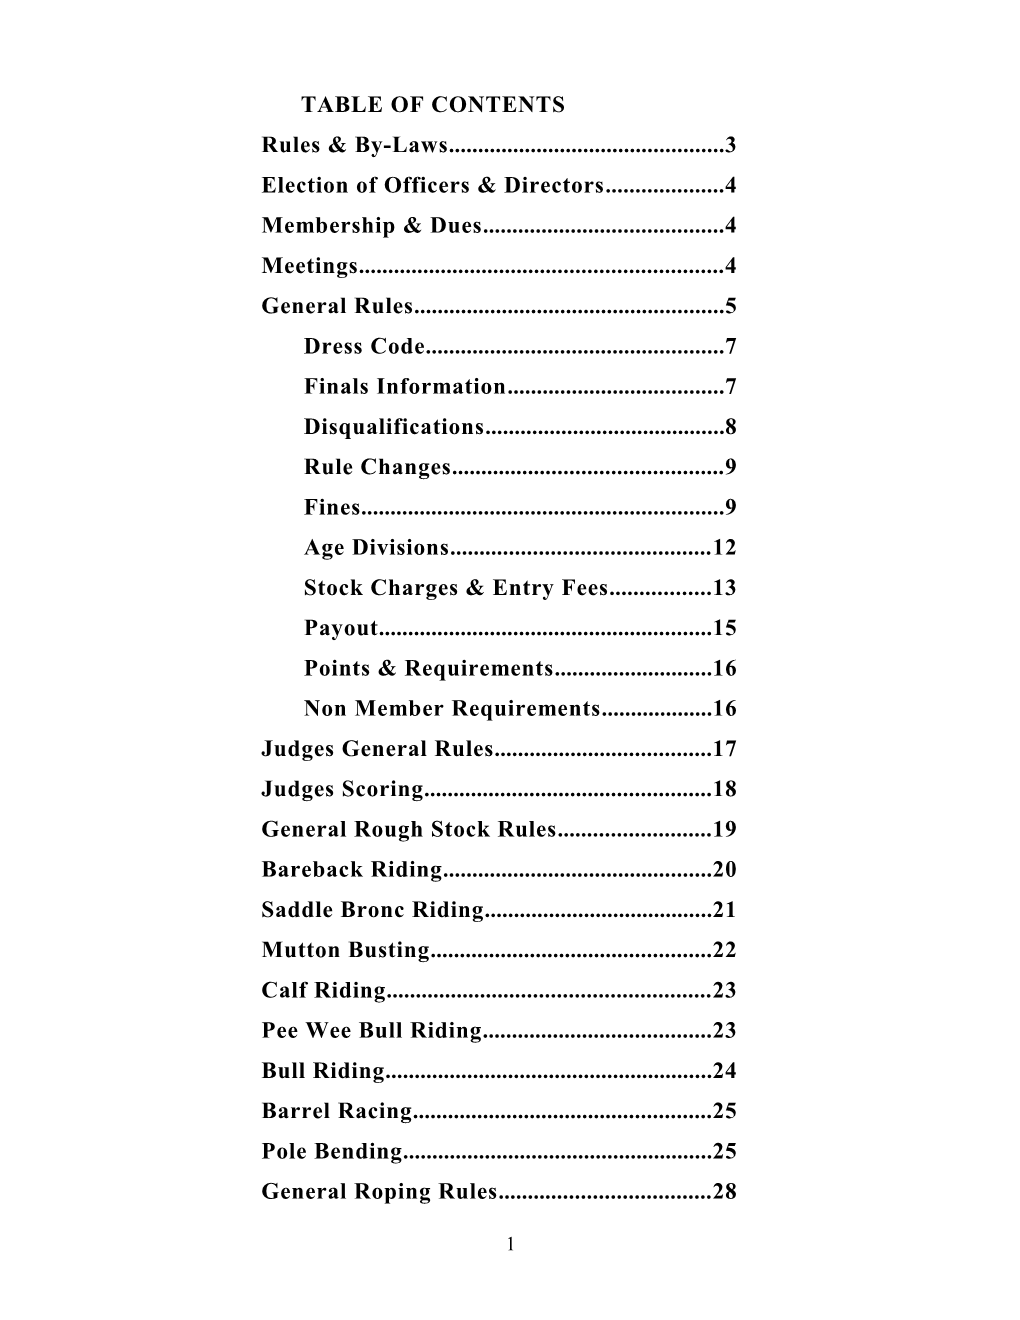 Table of Contents s335